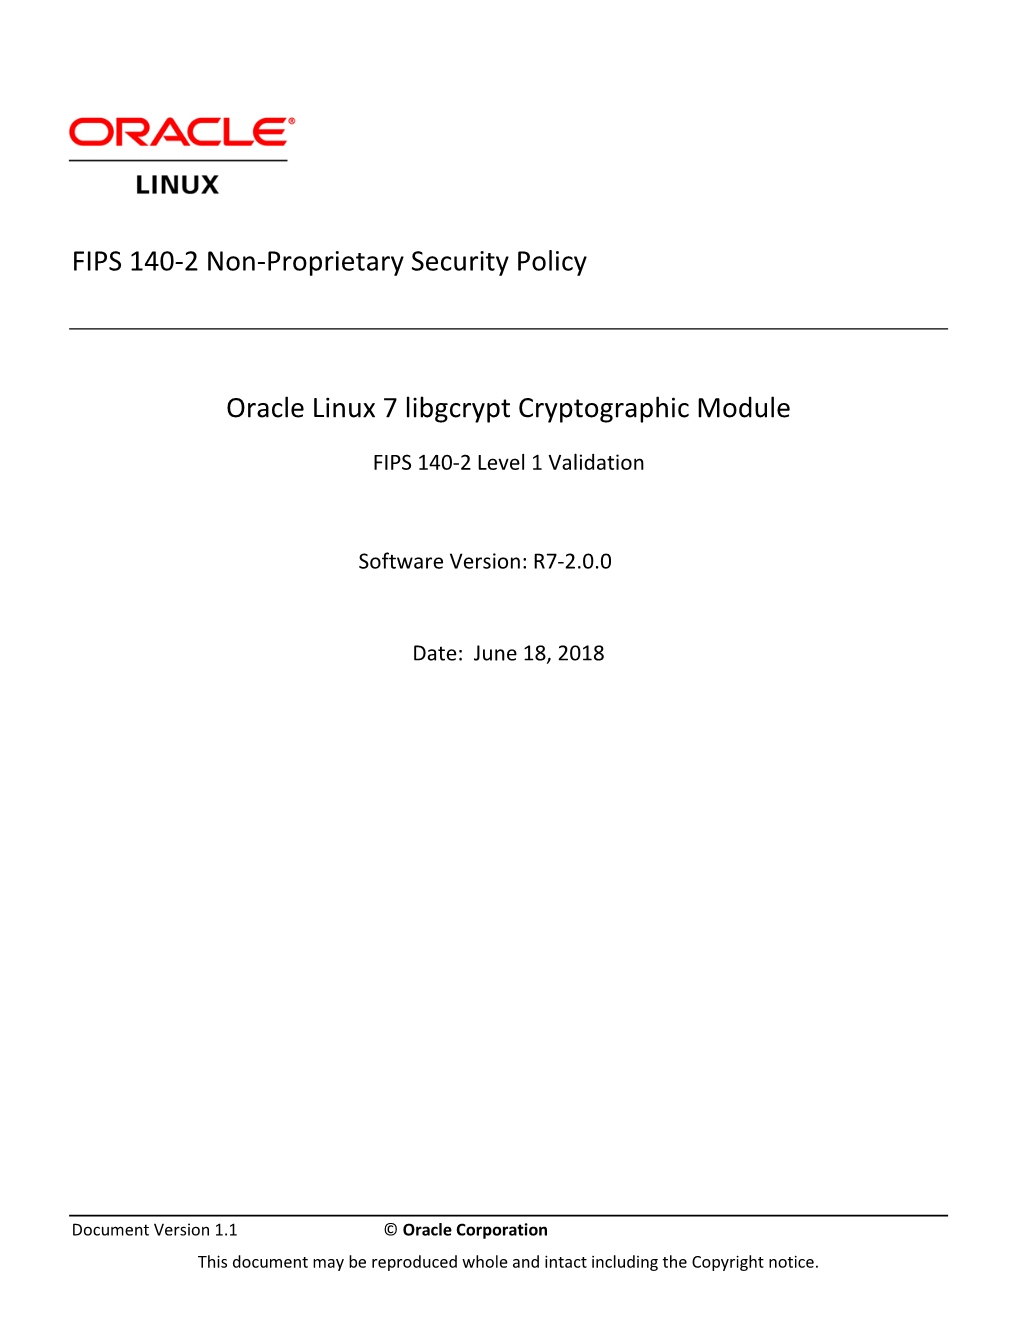 FIPS 140-2 Non-Proprietary Security Policy Oracle Linux 7 Libgcrypt Cryptographic Module